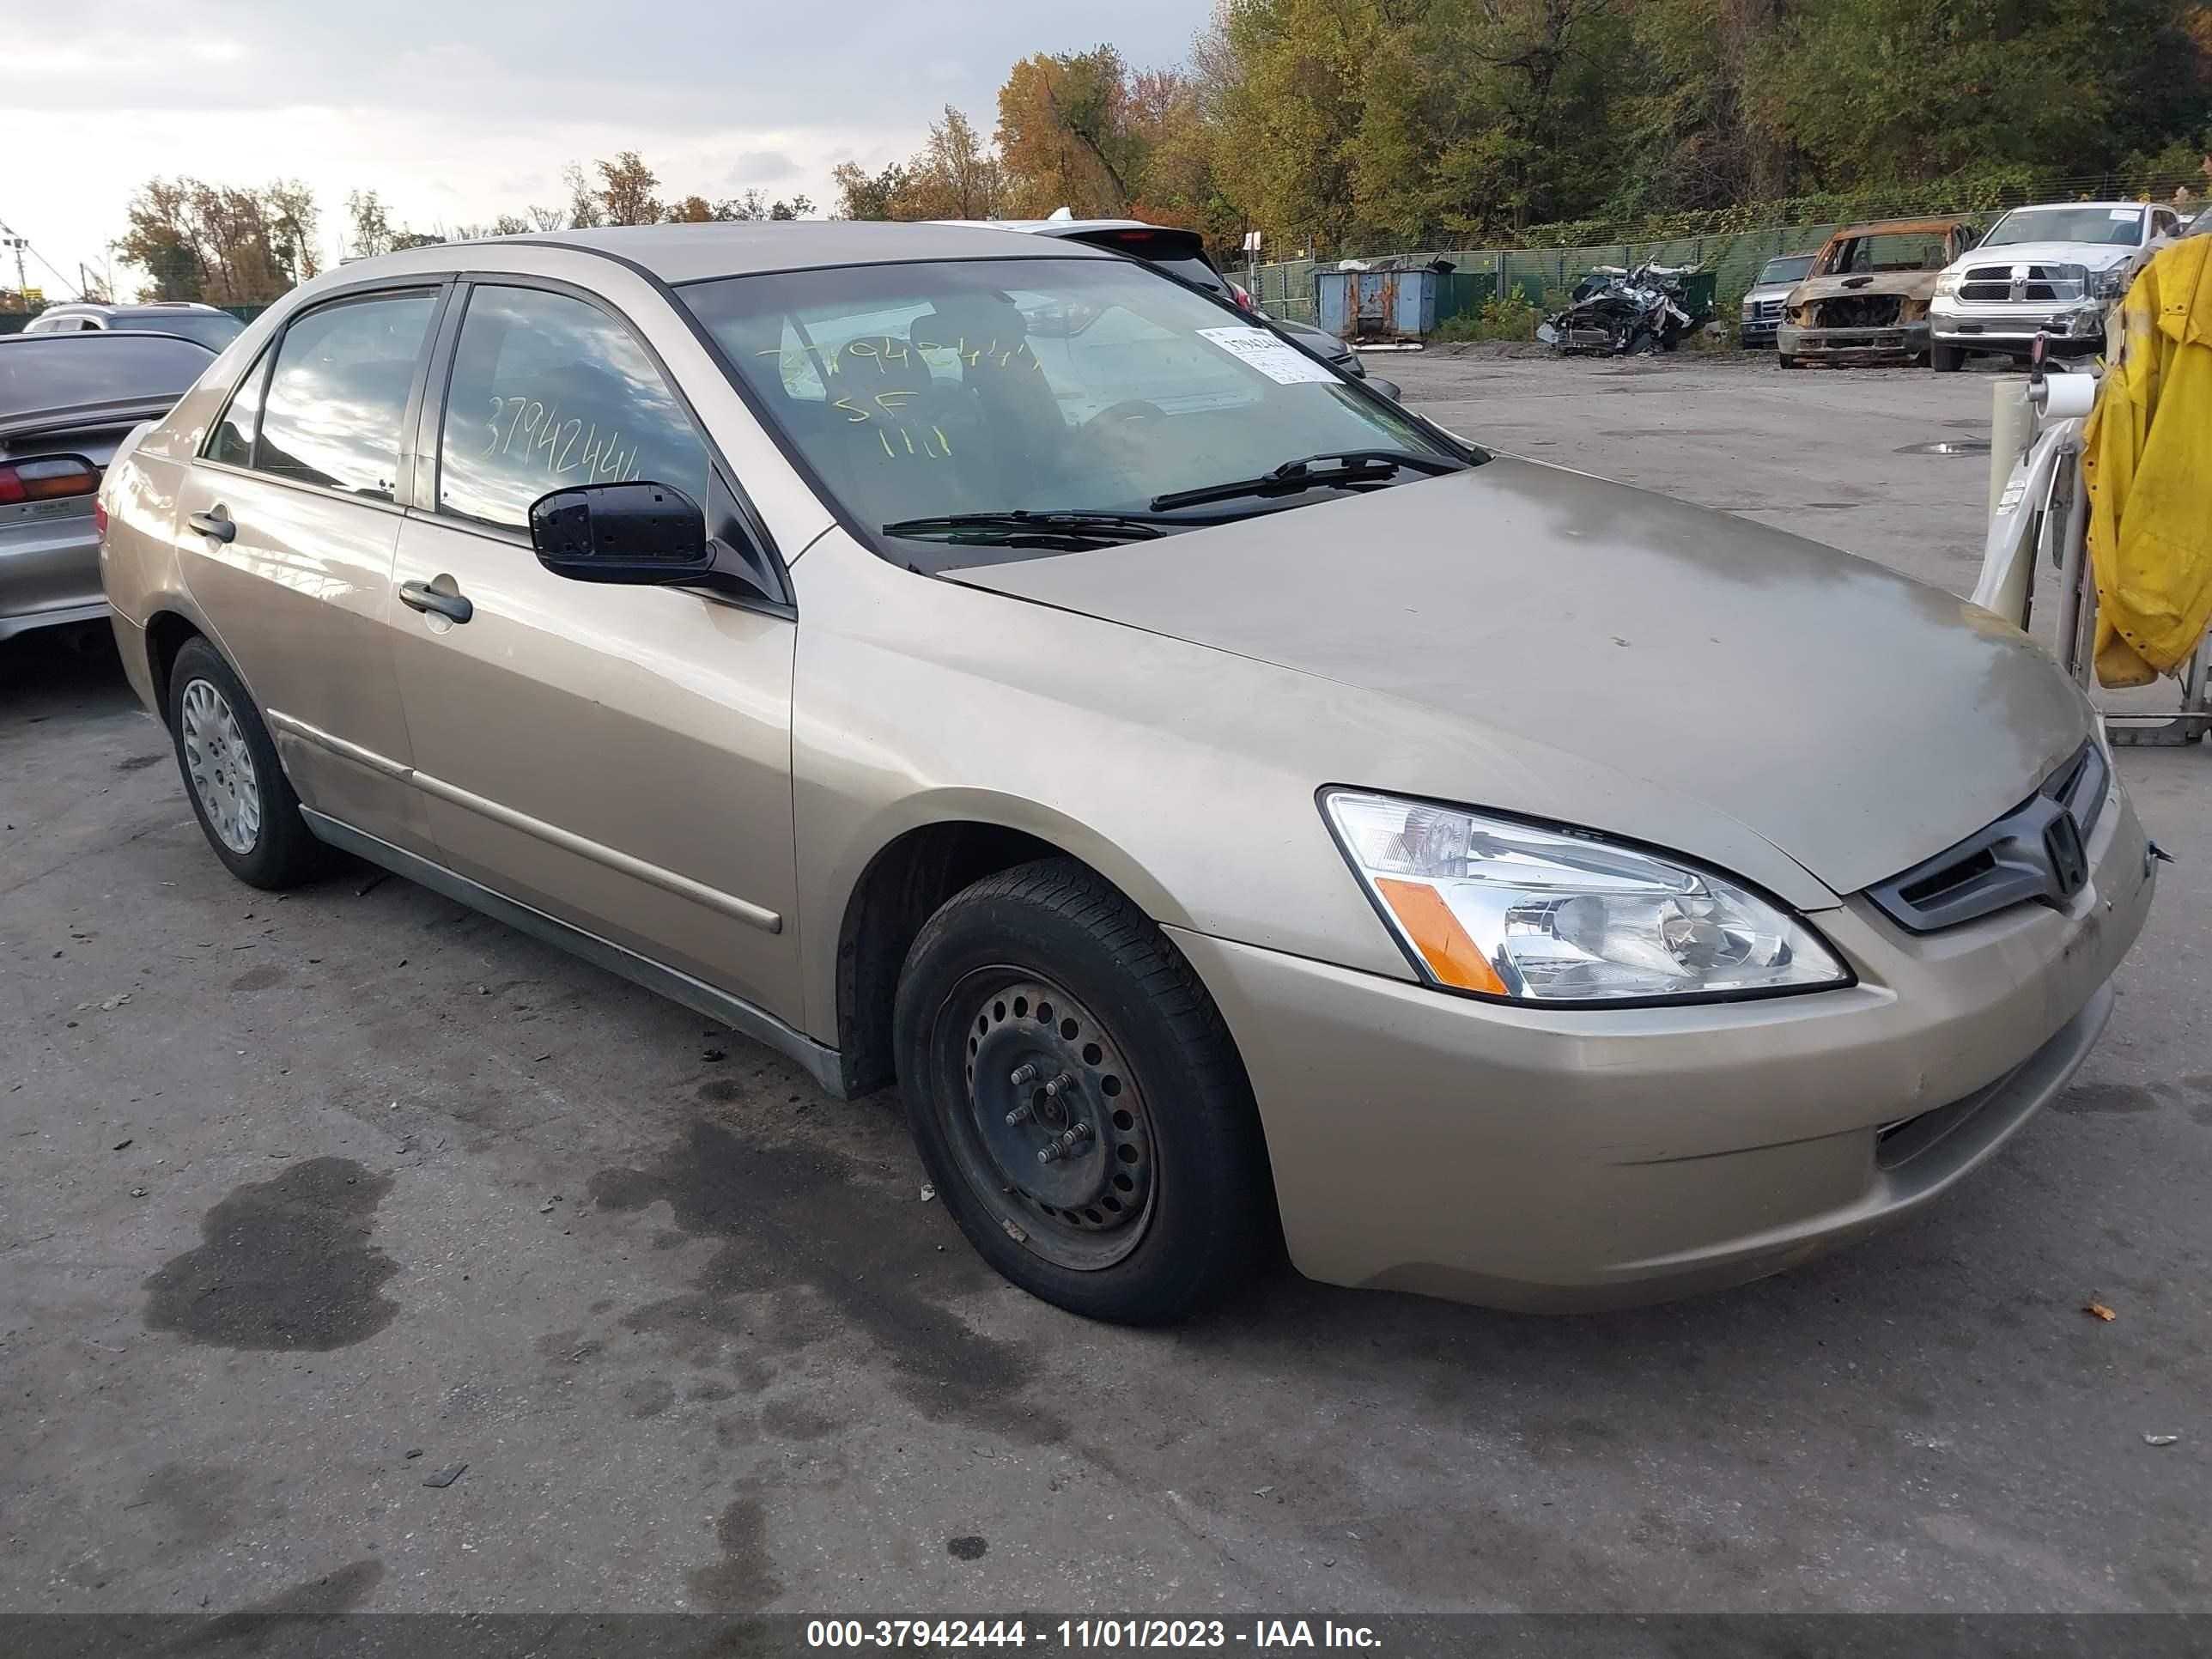 vin: 1HGCP26879A154814 1HGCP26879A154814 2005 honda accord 2400 for Sale in 21226, 3131 Hawkins Point Road, Baltimore, Maryland, USA